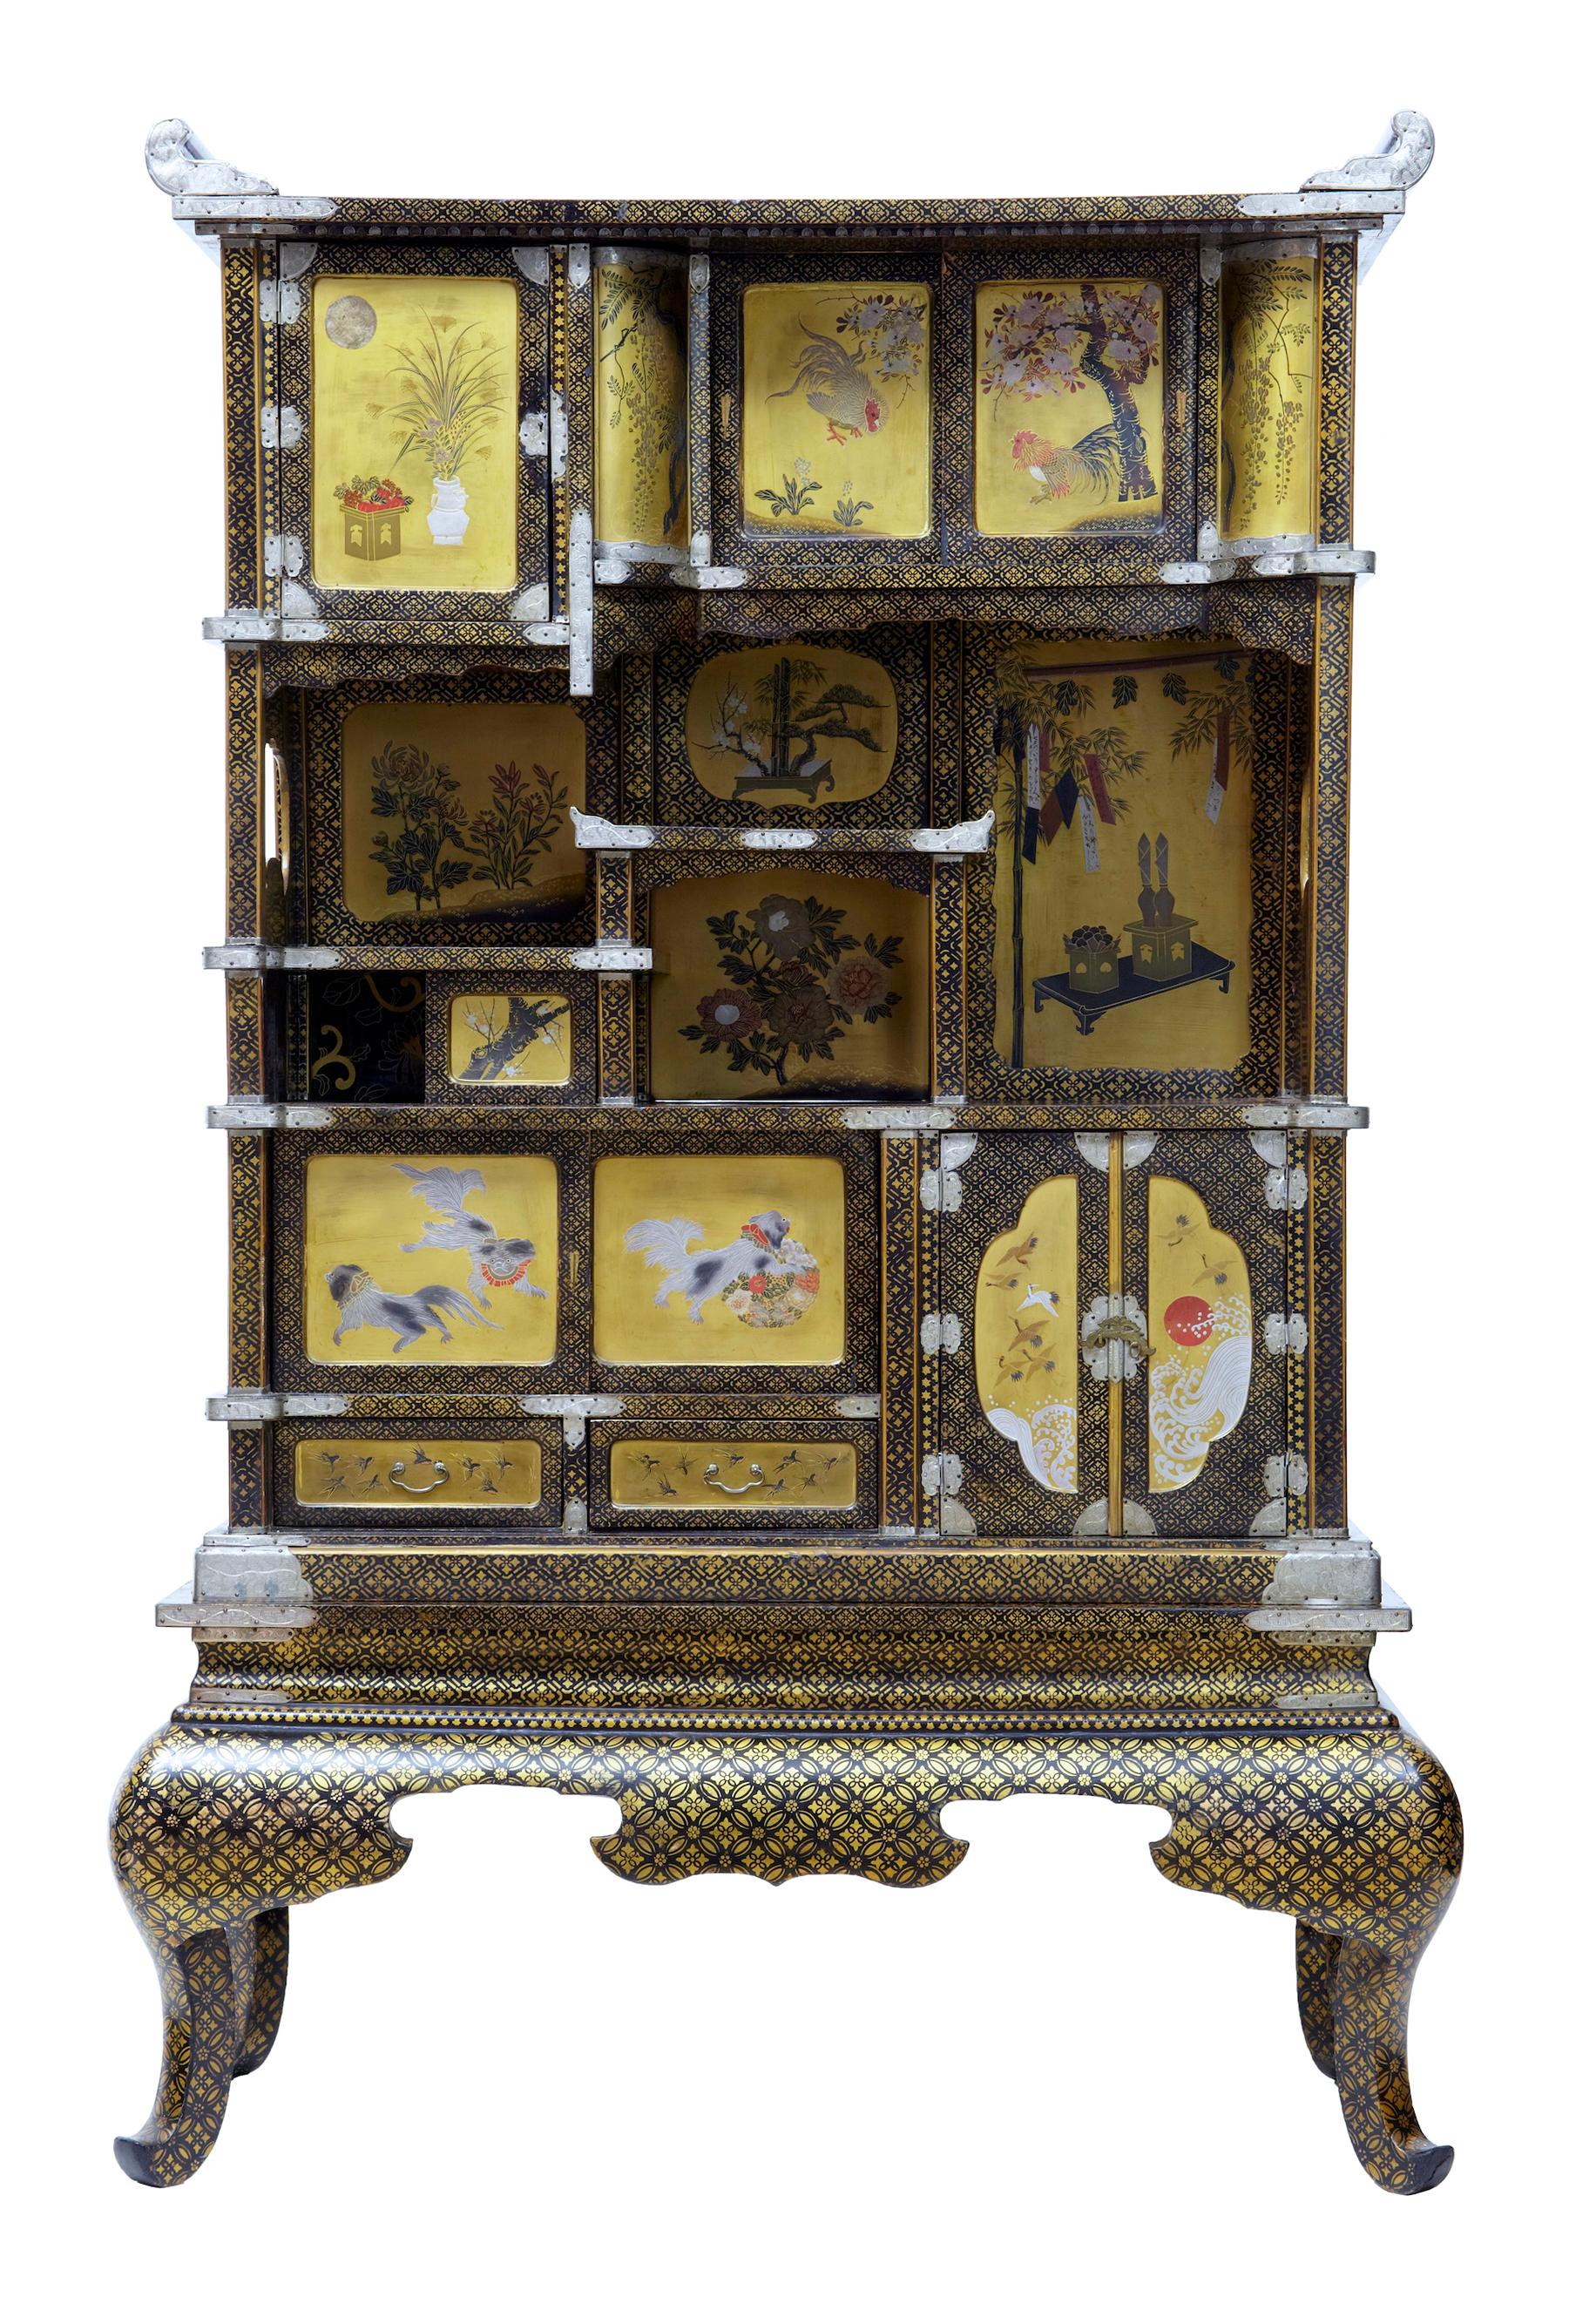 Superb quality Japanese display cabinet, circa 1890. Contains various scenes from Japanese life on the gold panels, showing birds, dogs, flowers and foliage. Decorated front and back and on the inside as well. Splits at the base. Compartments